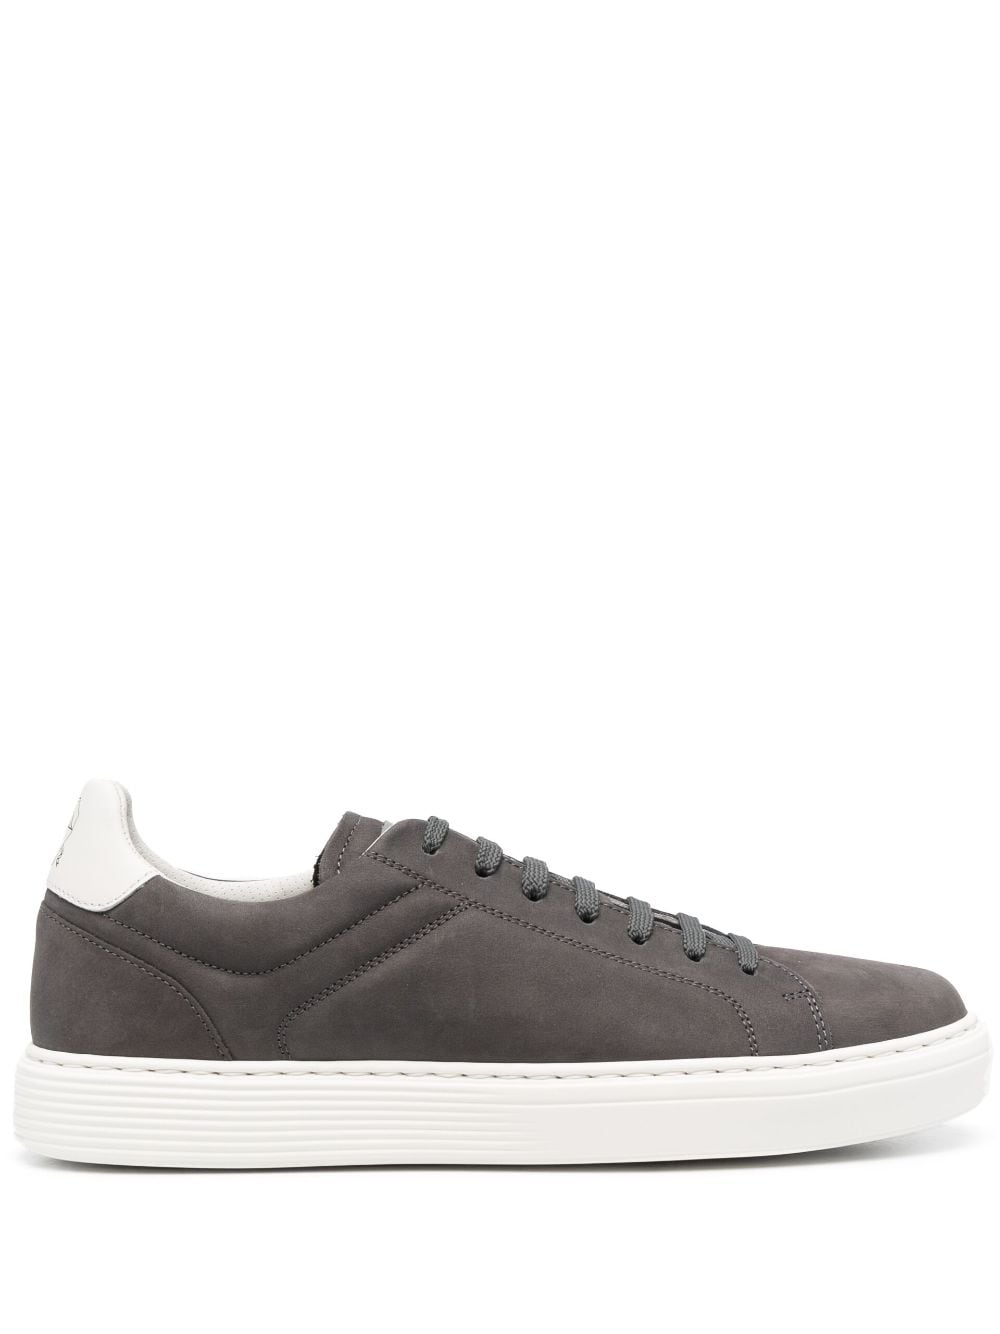 Image 1 of Brunello Cucinelli nubuck-leather low-top sneakers